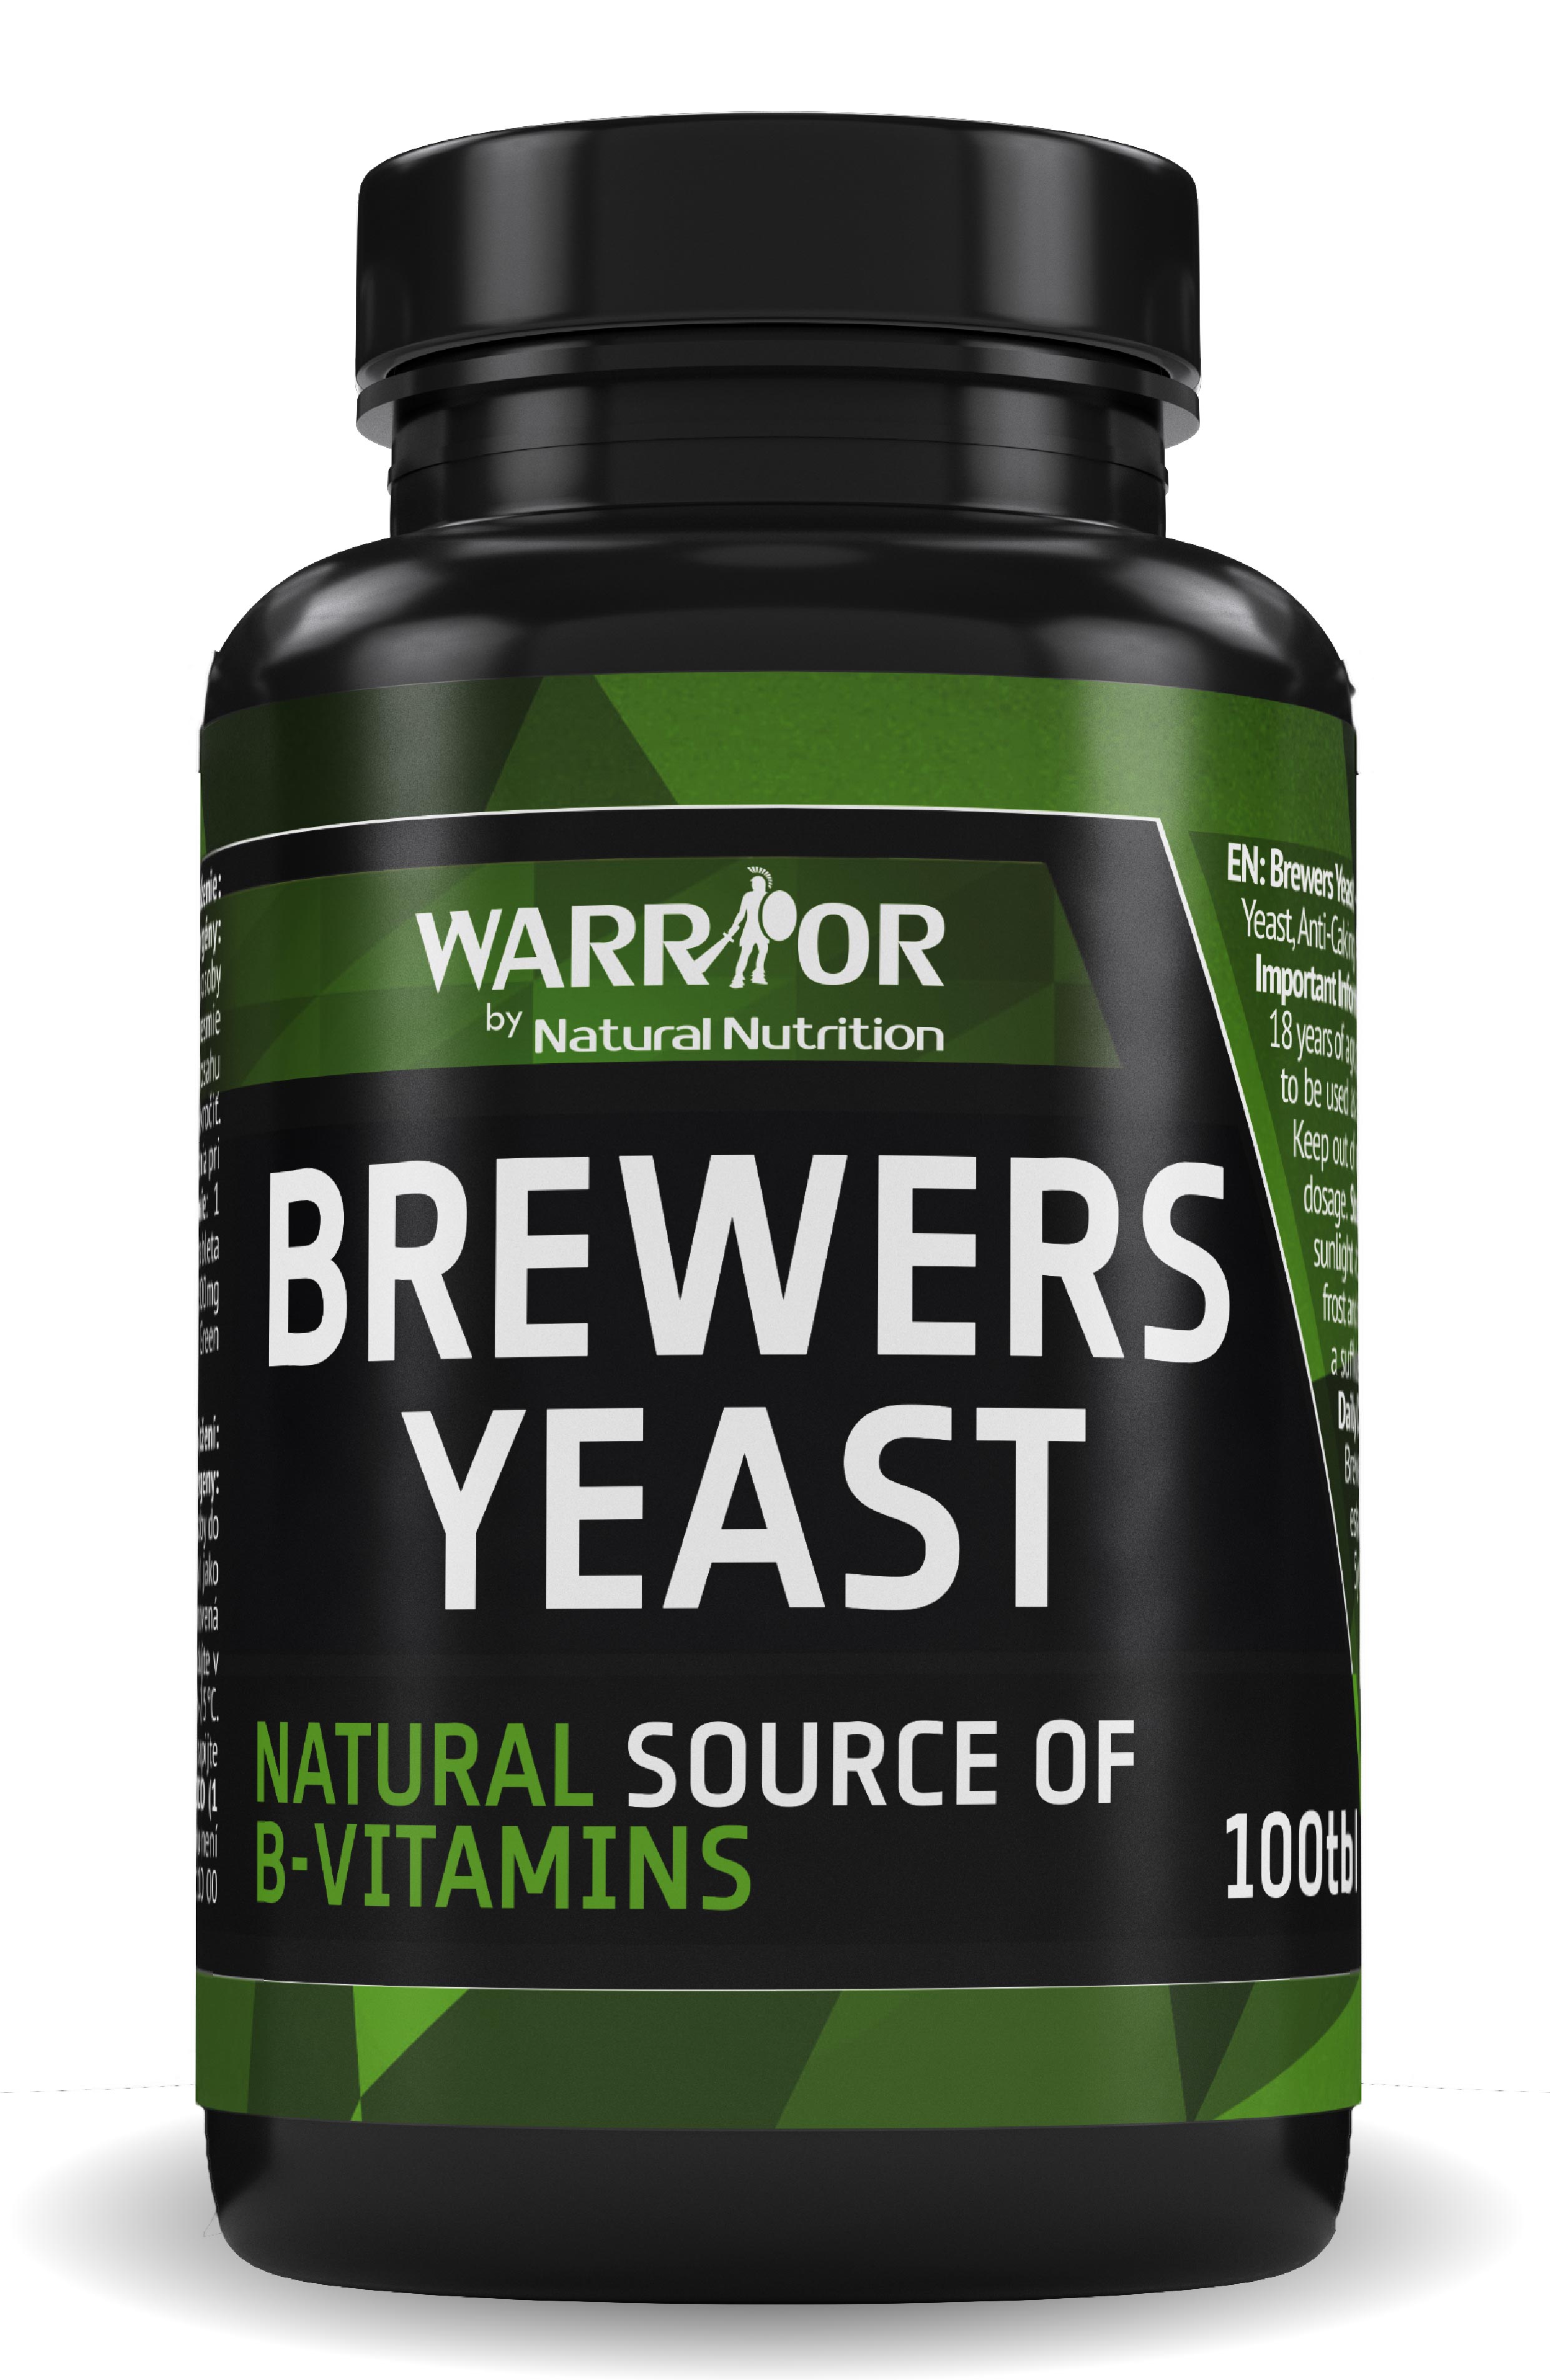 Brewers yeast.